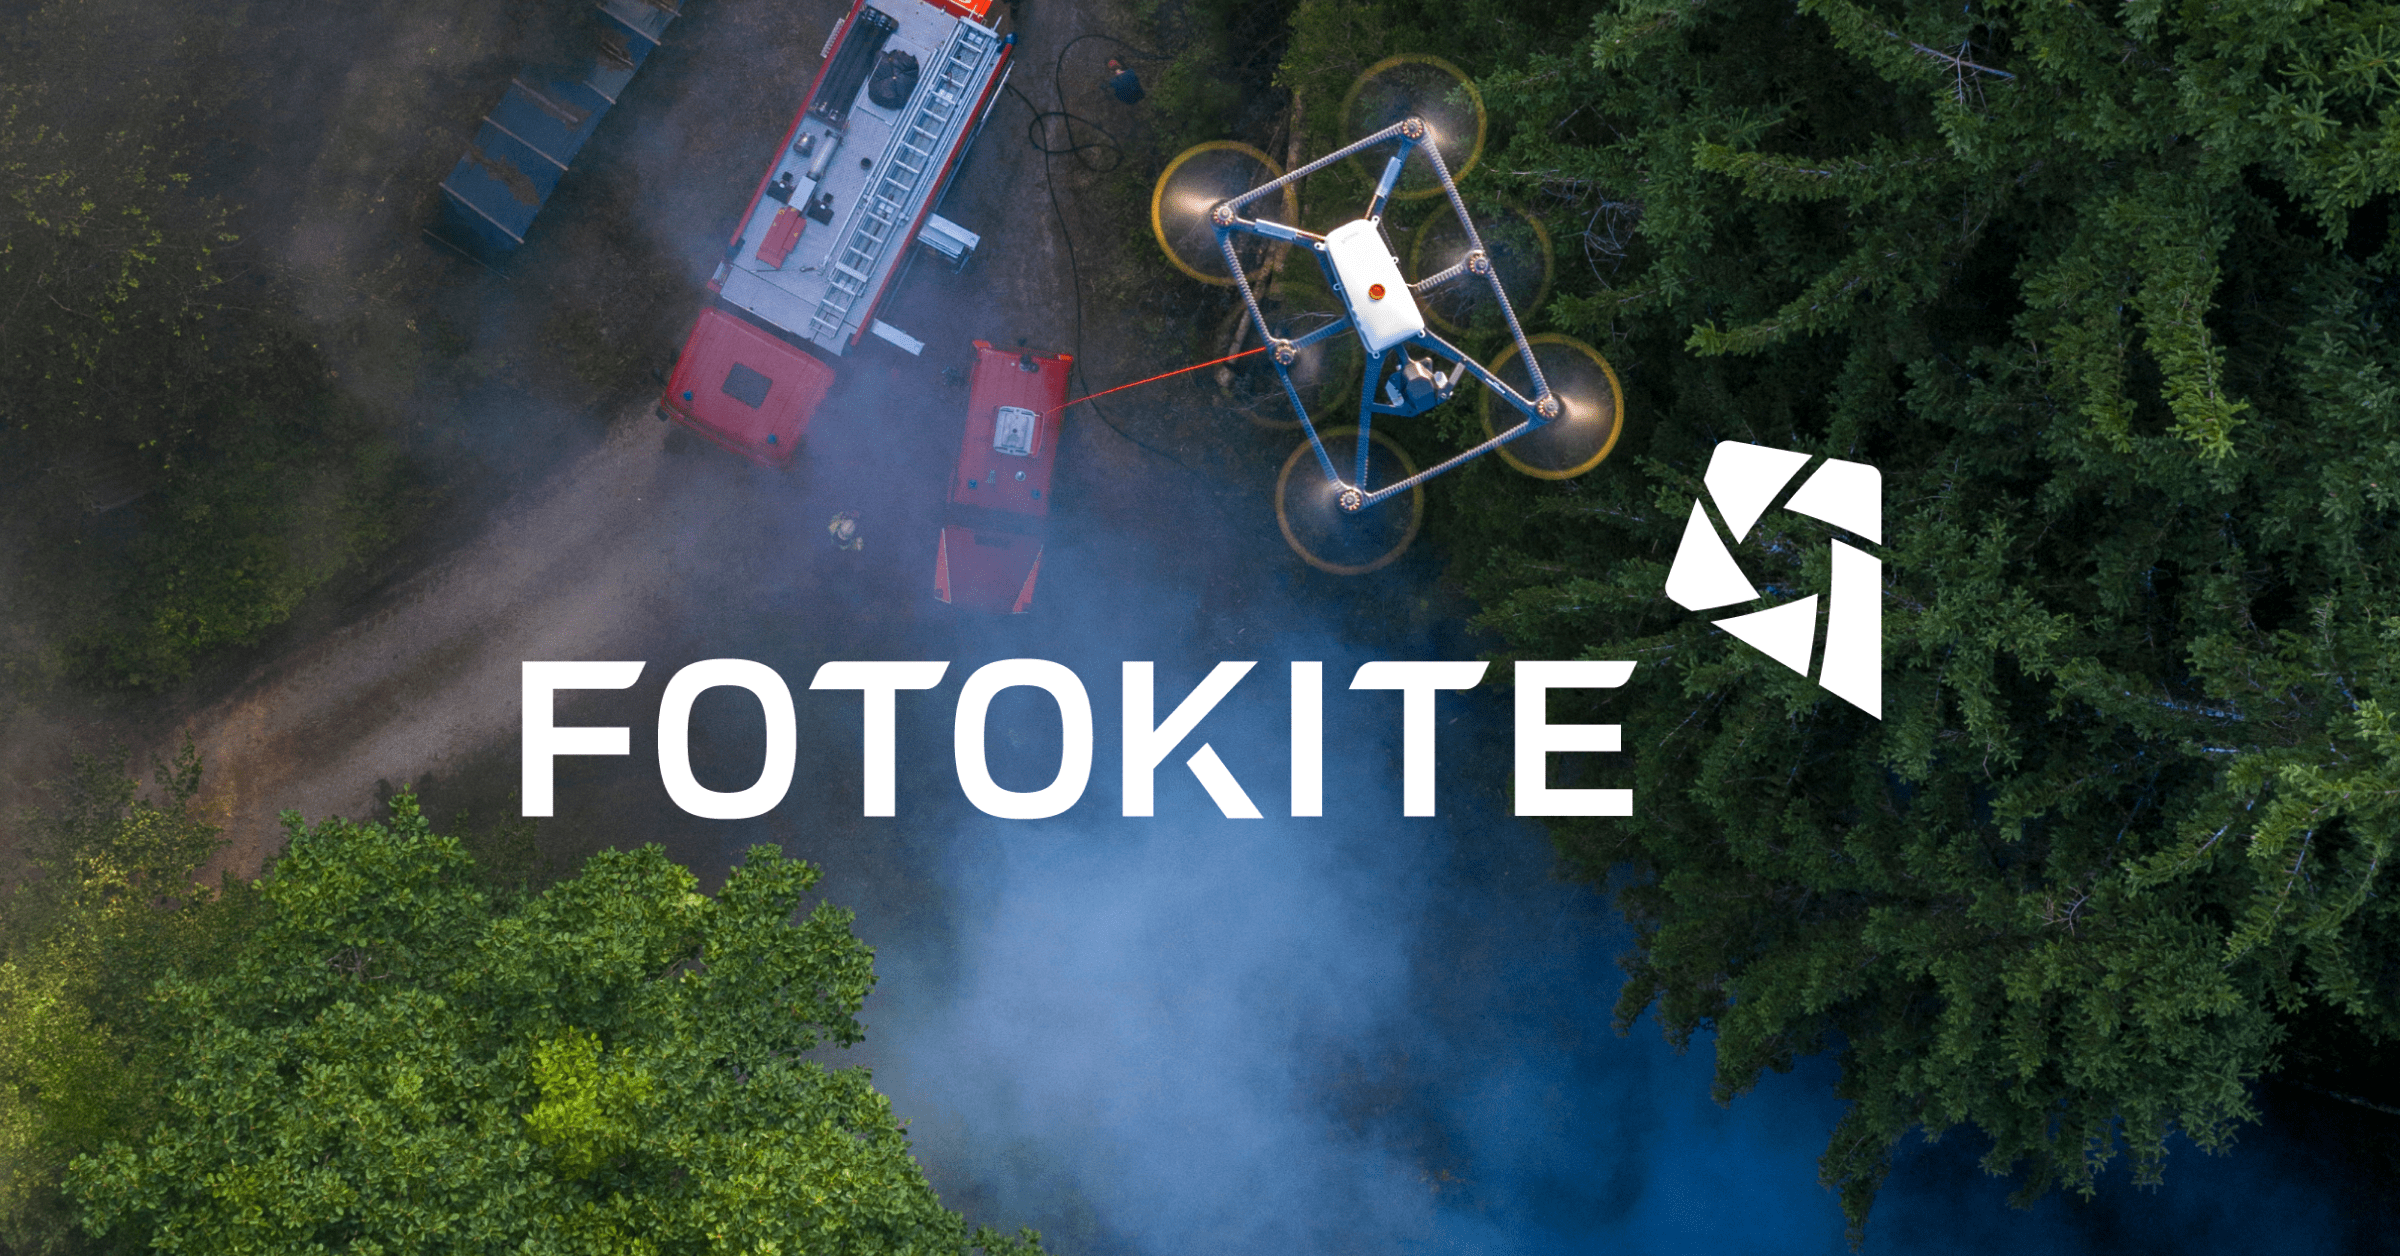 Fotokite based in Zurich secures fresh capital of 10 million Swiss francs